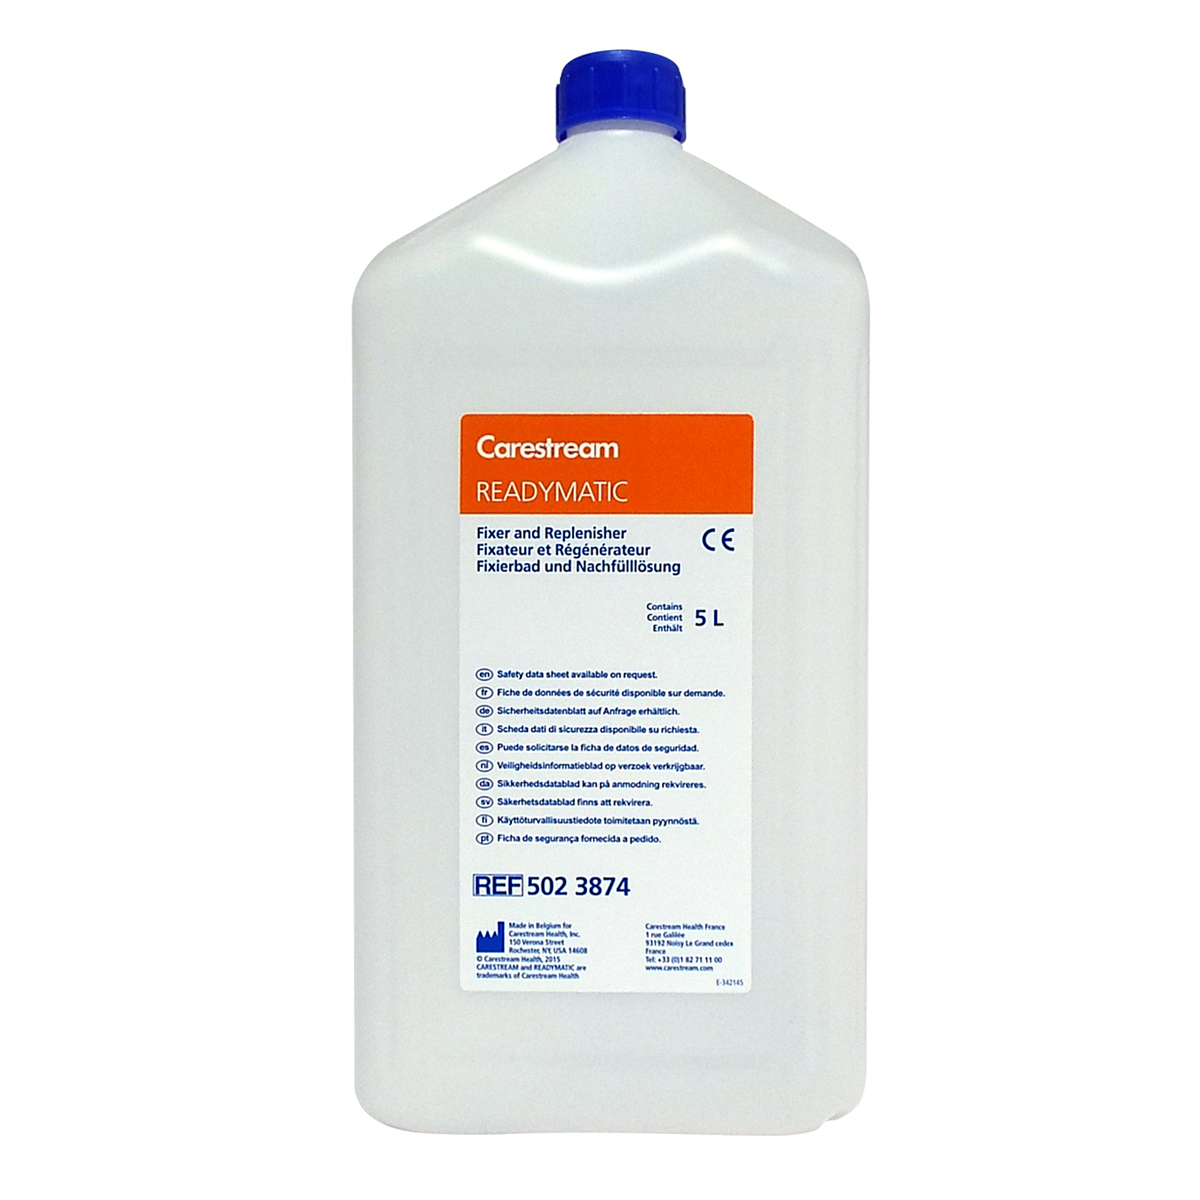 READYMATIC Fixer and Replenisher (2x5 L)